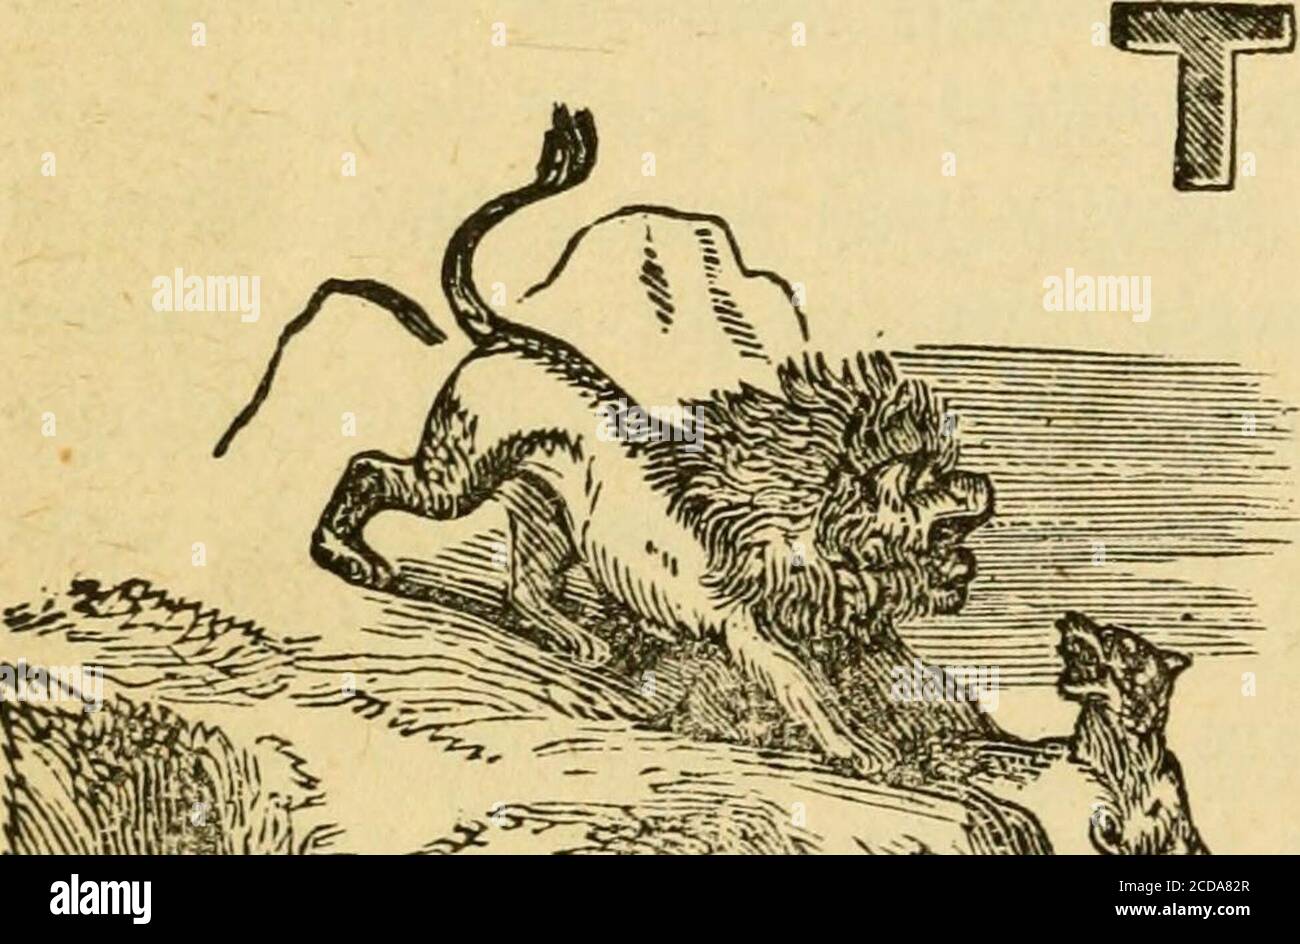 . Wild scenes of a hunter's life; . CHAPTER XXXIII.. A FRENCH OFFICER HUNTING LIONESSES. HE following narrative jsfrom the French Journaldes Chasseurs, to which itwas contributed by Mr.Jules Gerard, as a remi-niscence of his service inAlgeria:.wviriL-»ir^ -^^^5-x-^=-^- —:-j.-^ fv-r^ I knew cf a lar^e old M.„.i.«x..i ^ &lt;^ ^.^^v^x.^..-.^ ^?c-^^s^L^s, hon m the Smauls coun-try and betook myself in that direction. On arriving I heard thathe was in the Bonarif, near Batnah. My te... -^  not yet pitchedat the foot of the mountain, when I learned that . -vs at theFed Jong, where, on my arrival, Stock Photo